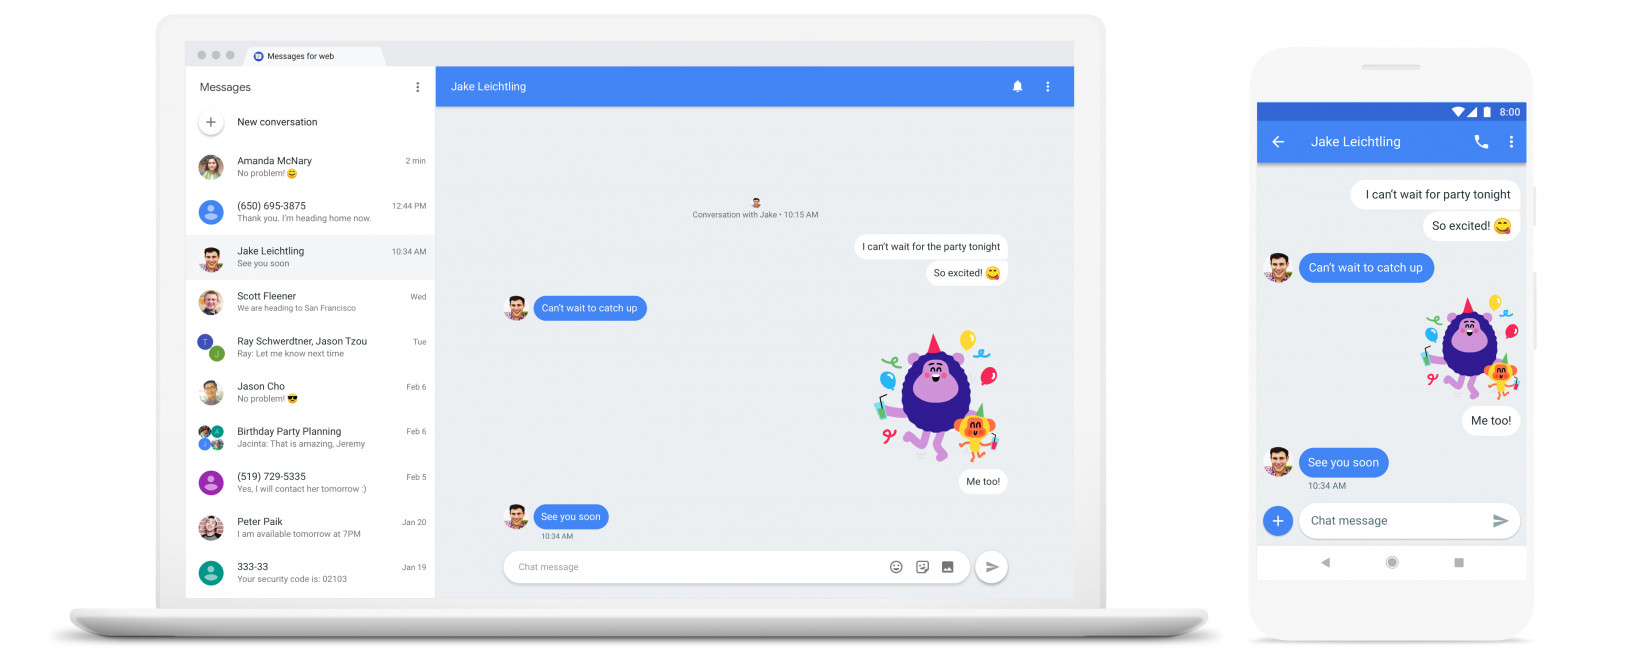 Chat will eventually get a desktop web interface for texting